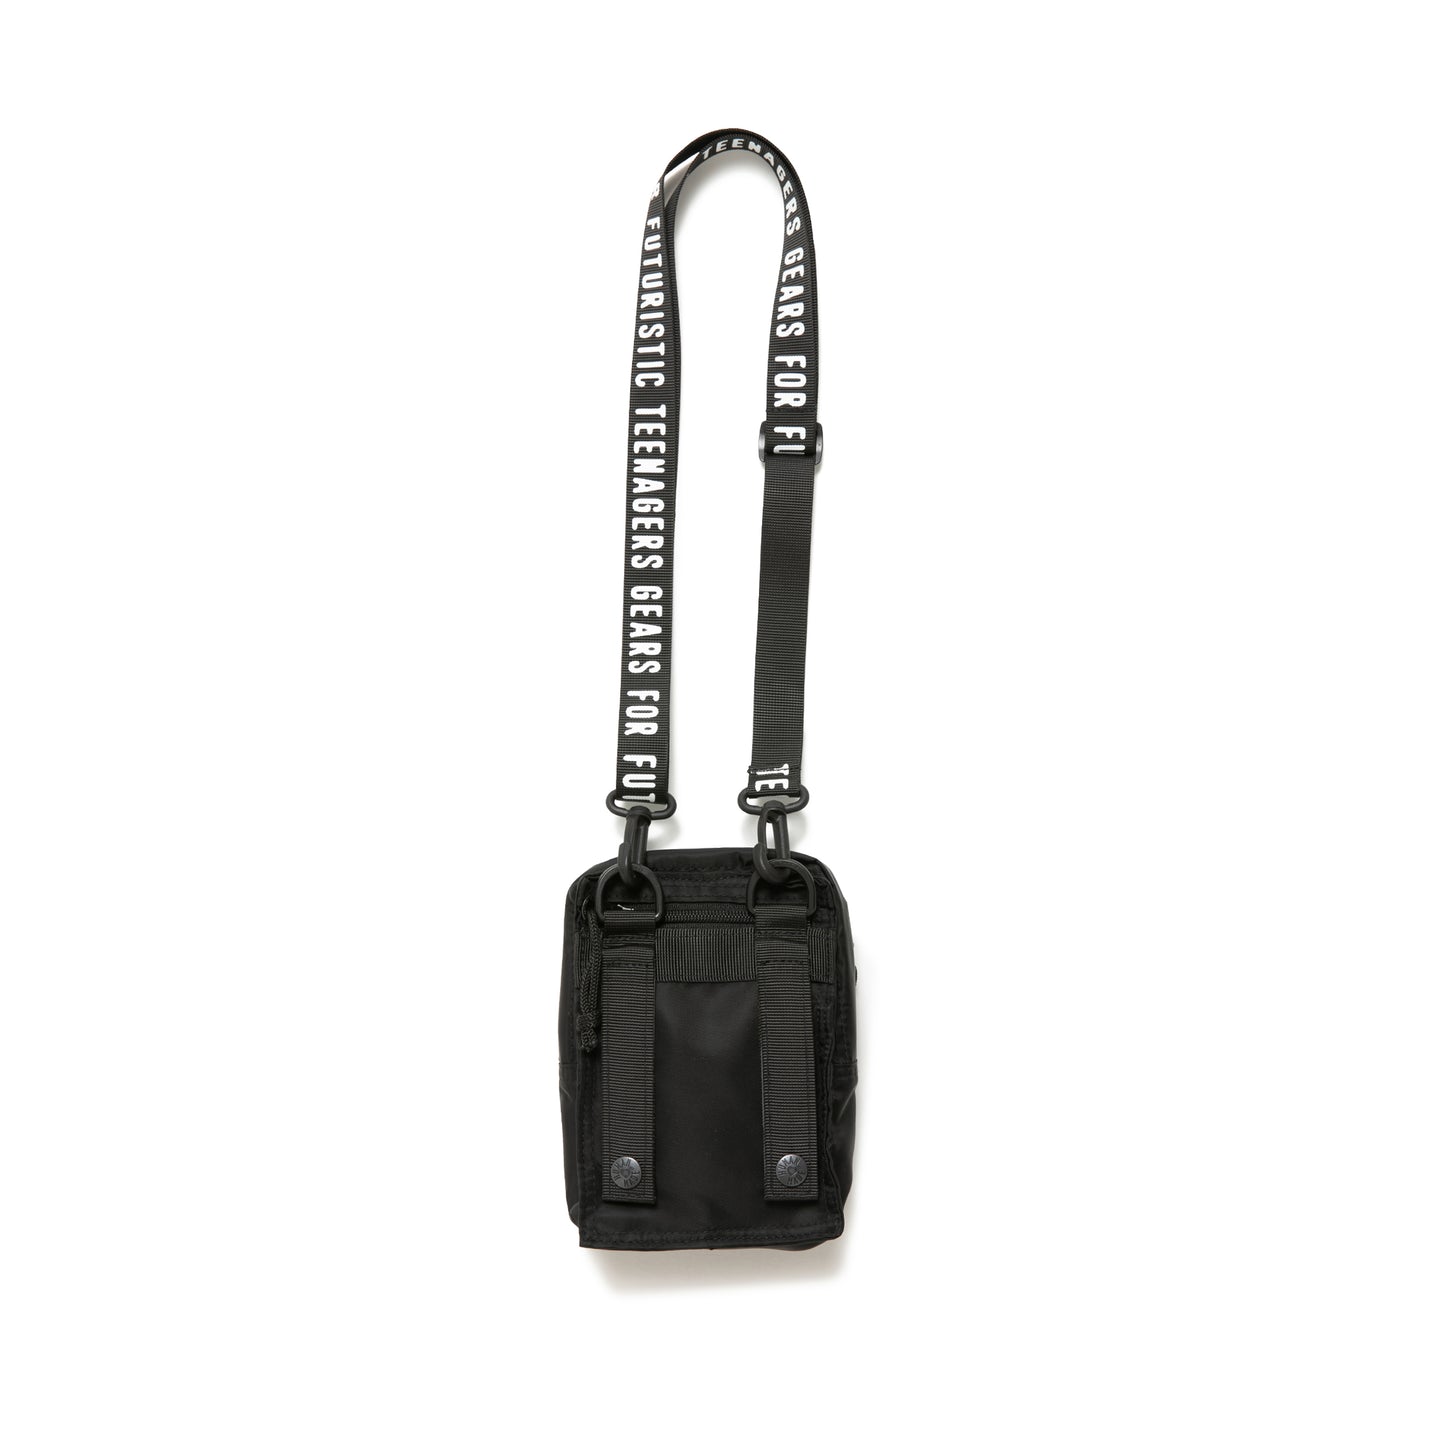 human made military pouch #2 (black)